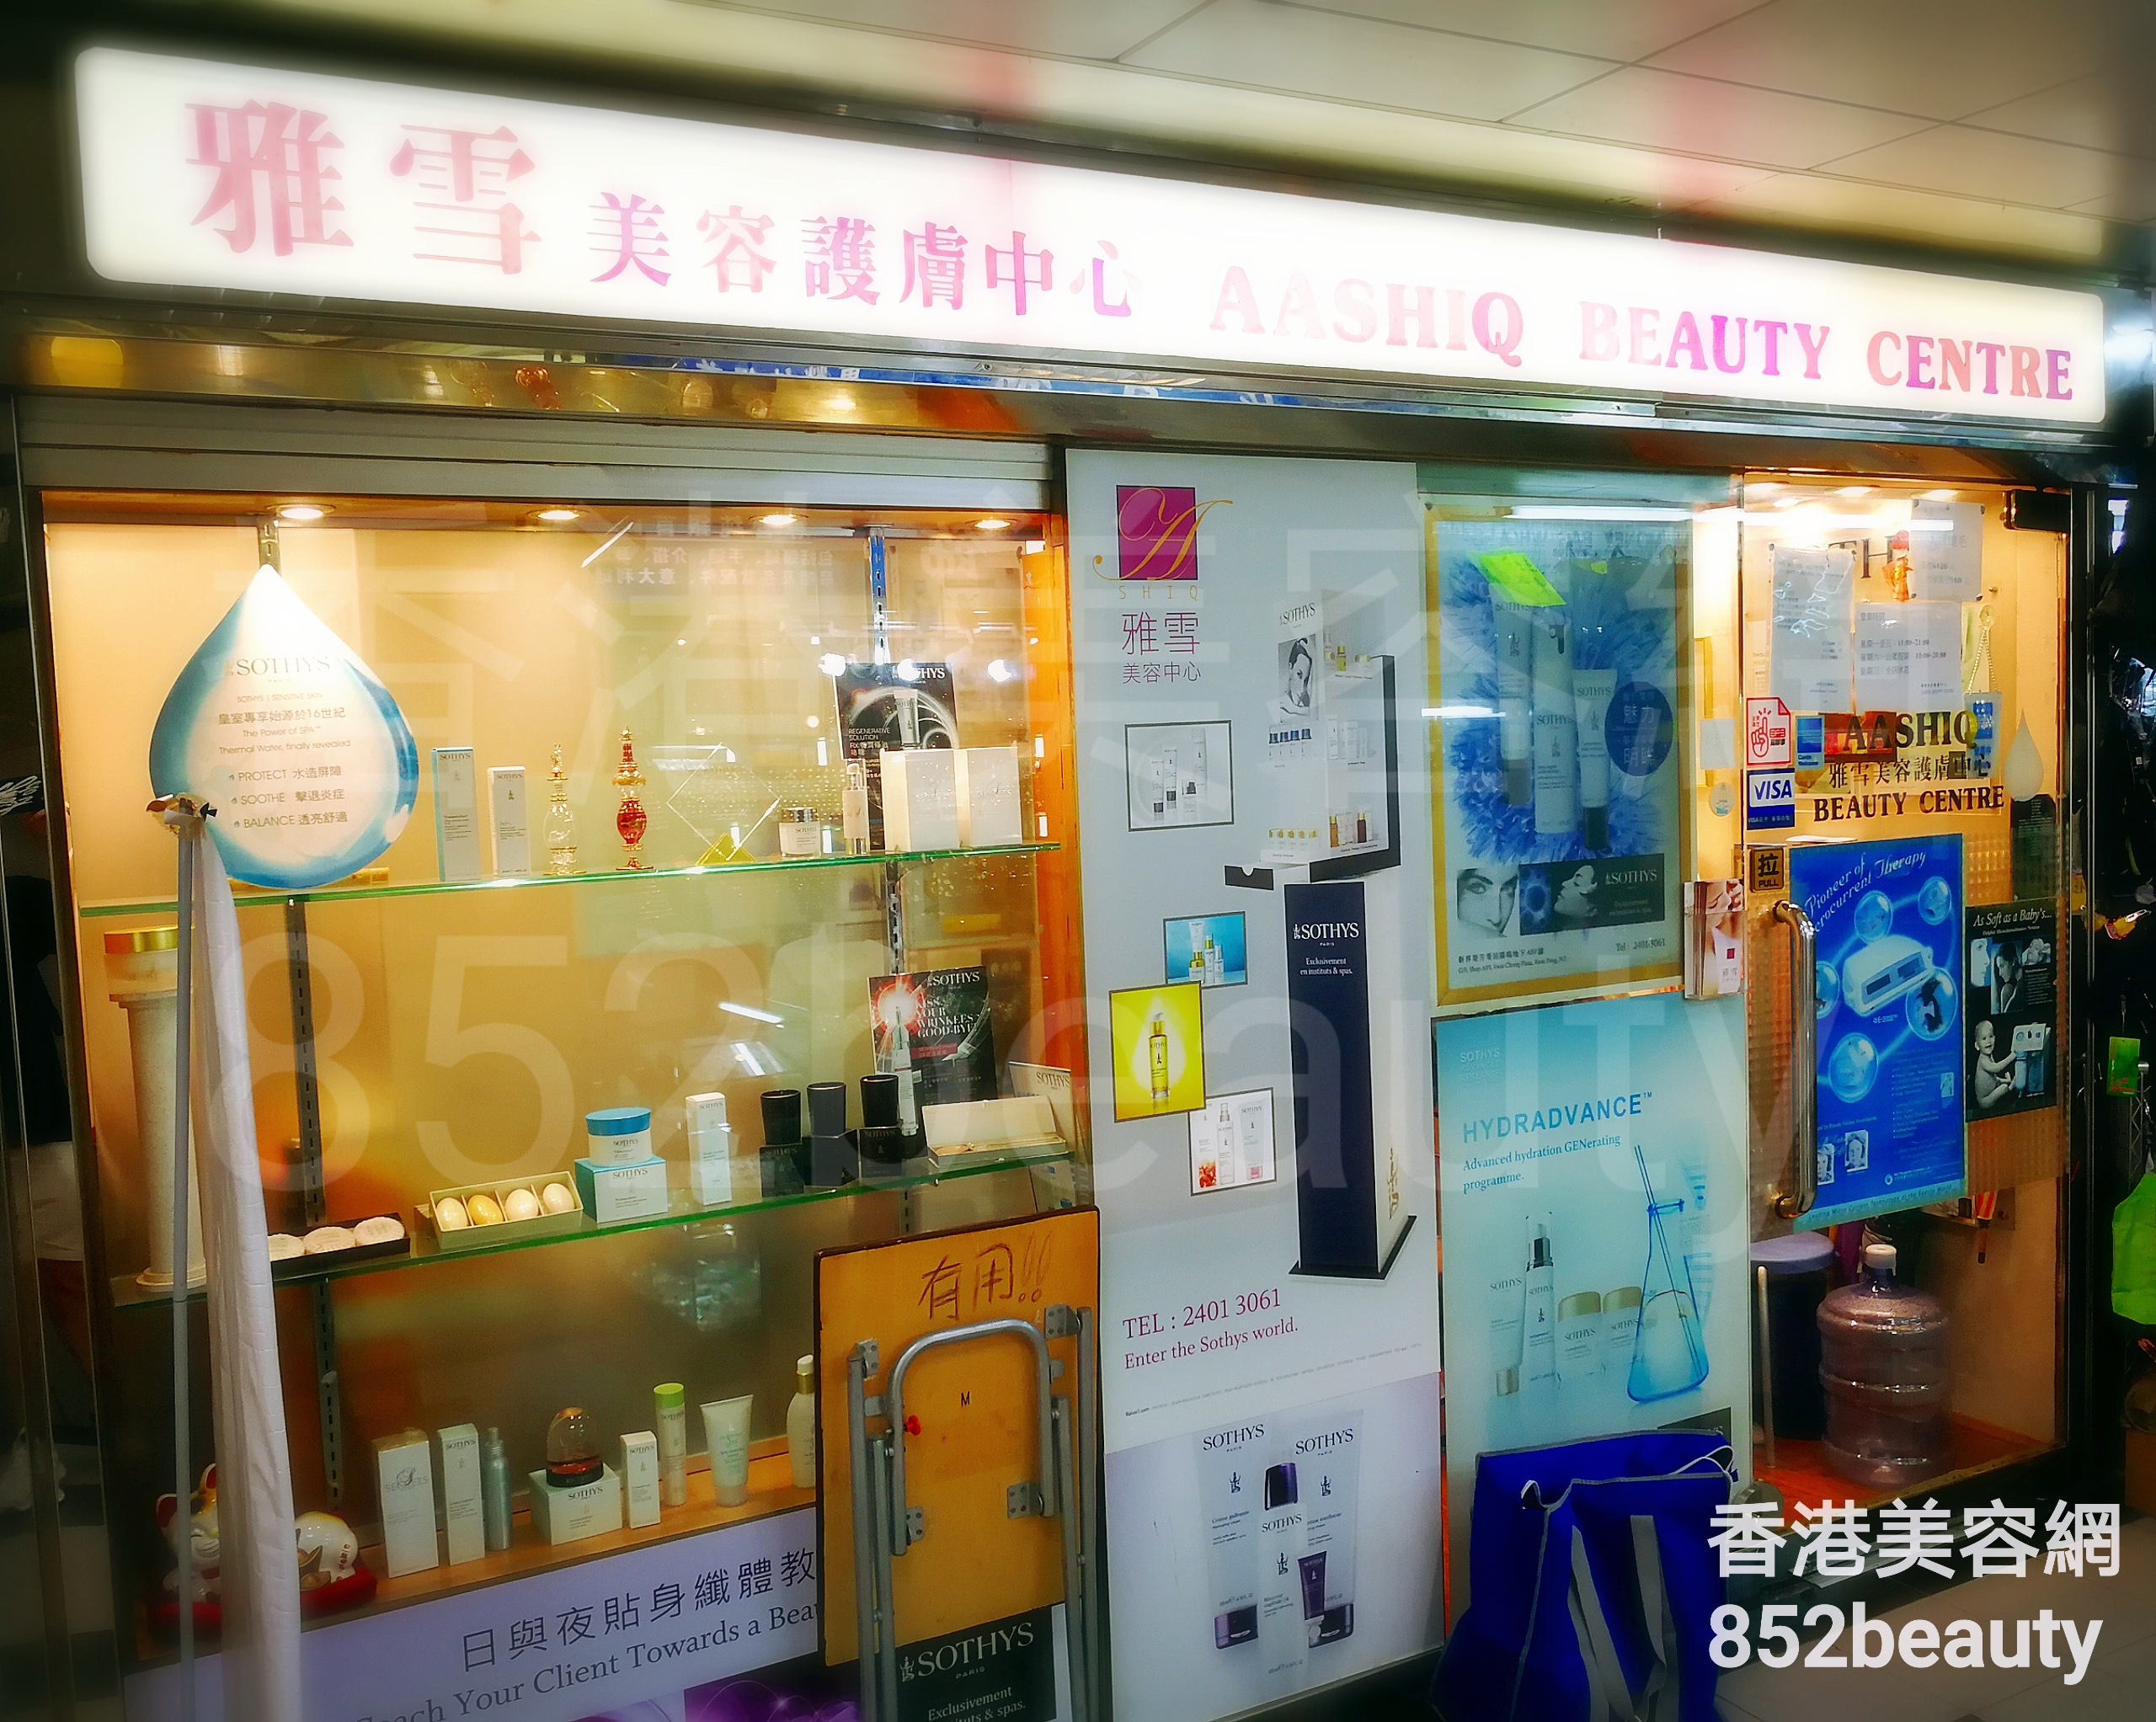 Hand and foot care: 雅雪美容護膚中心